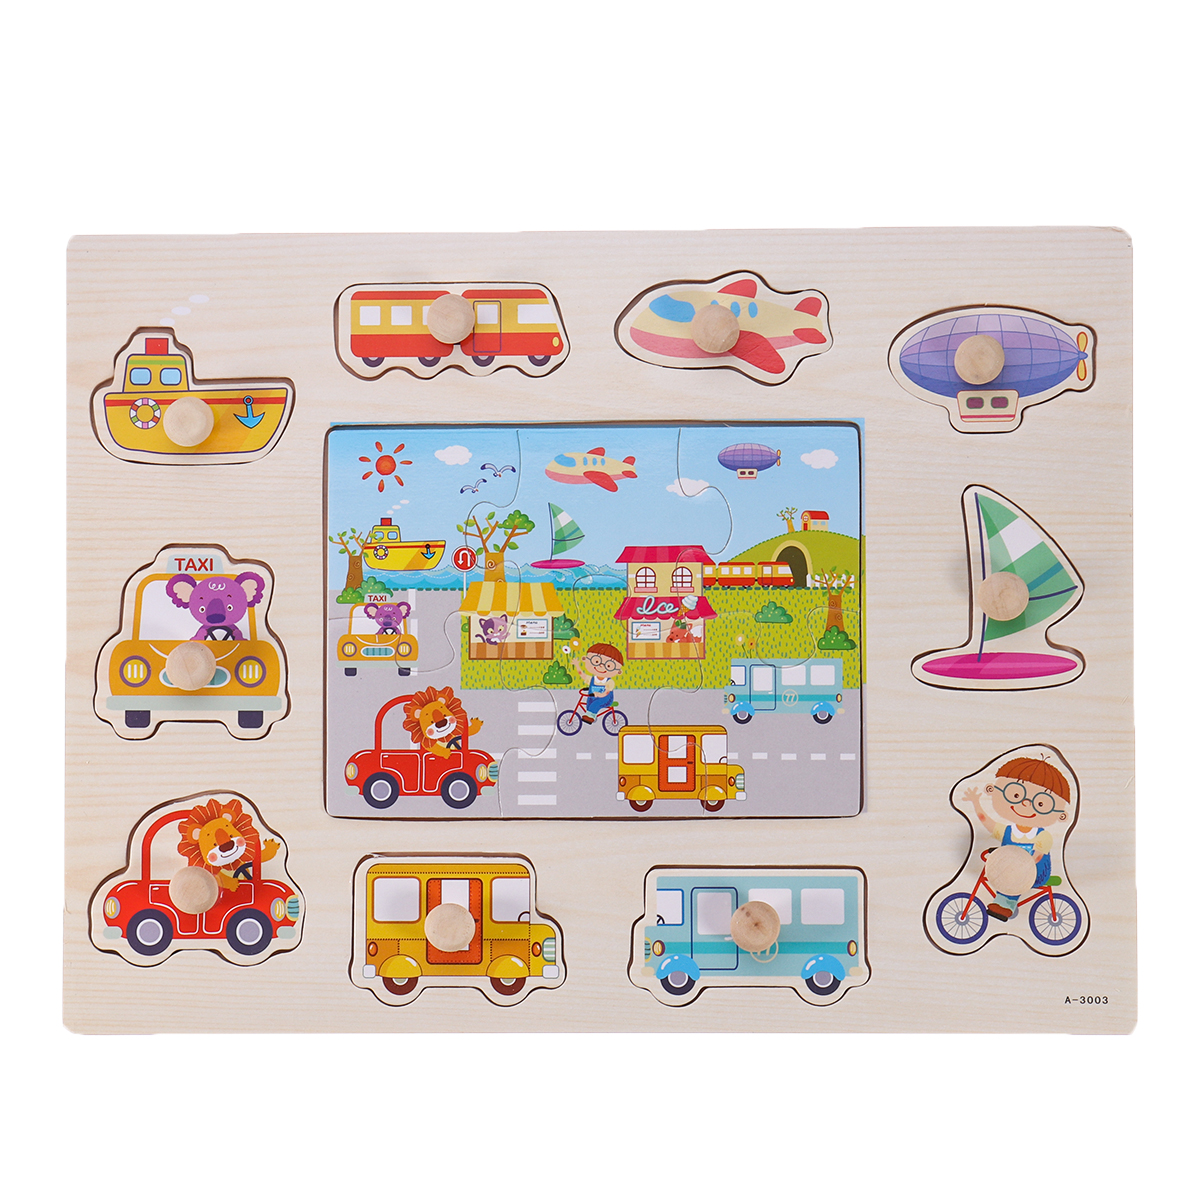 Wooden-Multi-style-Math-Jigsaw-Puzzle-Blocks-Board-Intelligence-Developing-Early-Education-Toy-for-K-1698283-9